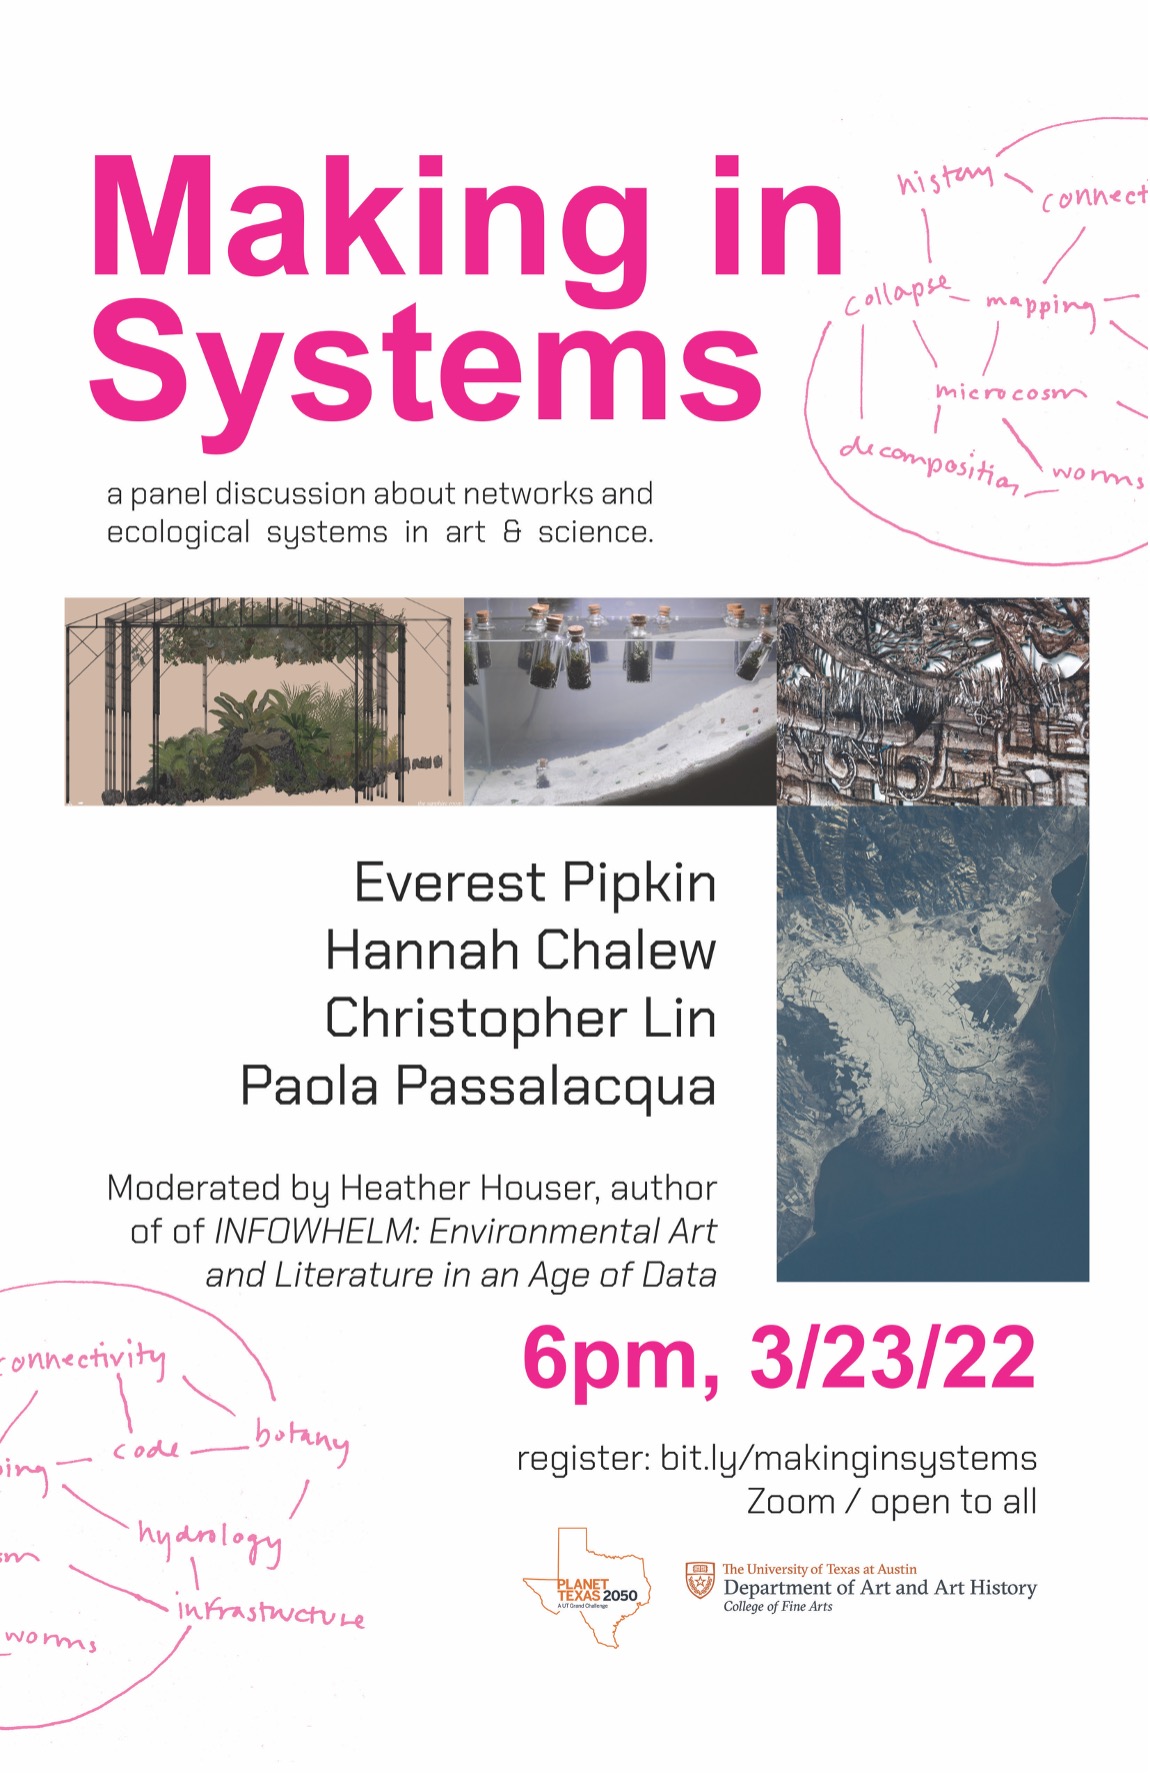 Making in Systems Flyer